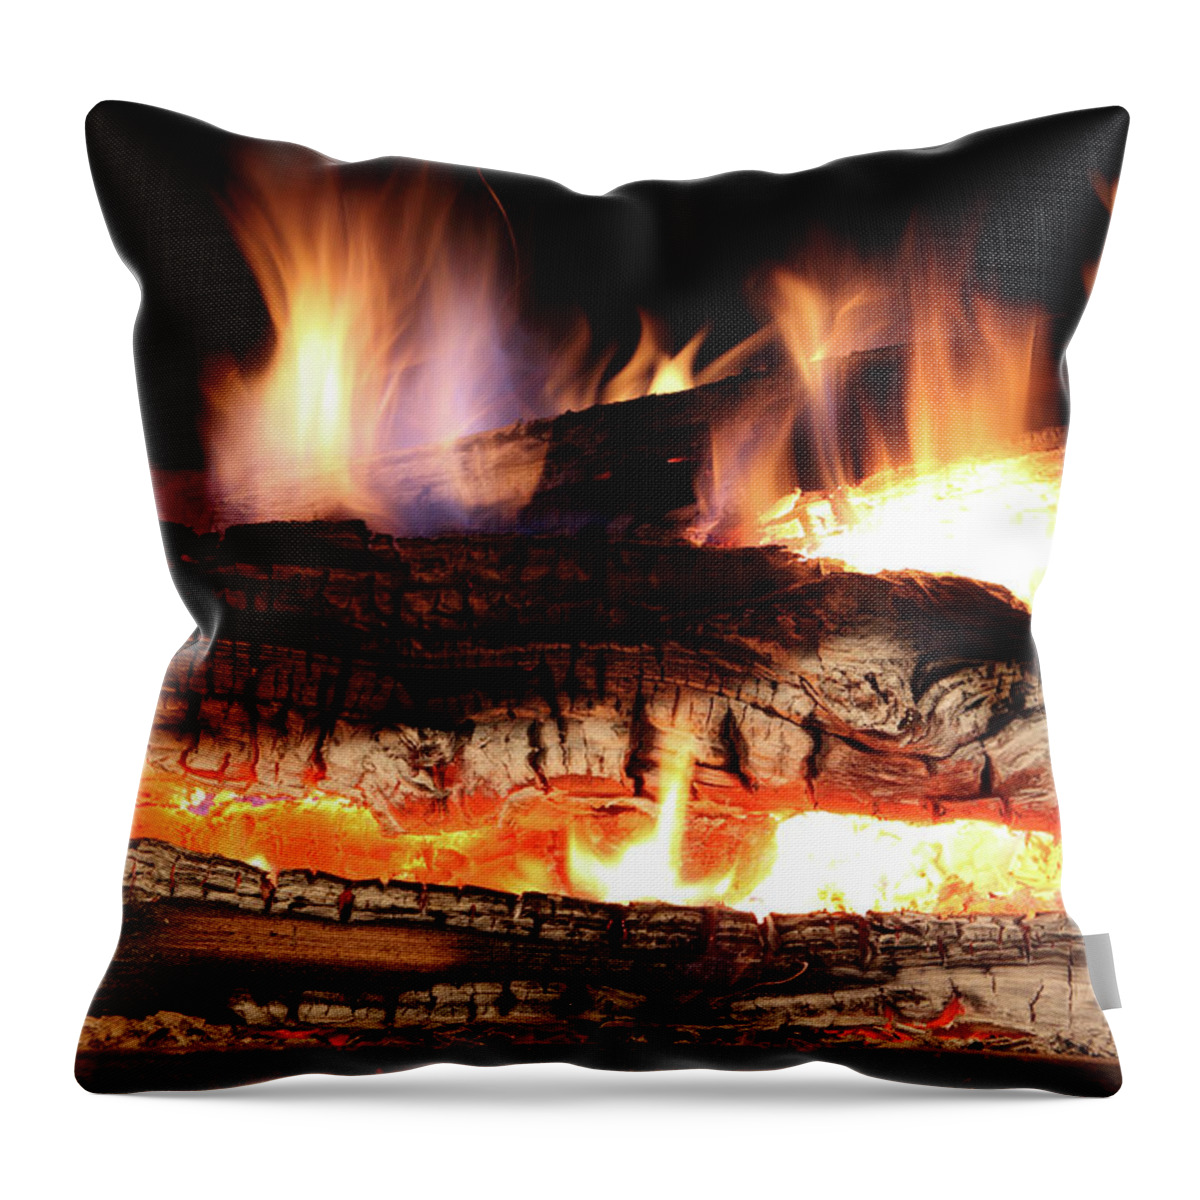 Orange Color Throw Pillow featuring the photograph Burning Fireplace by Jenjen42